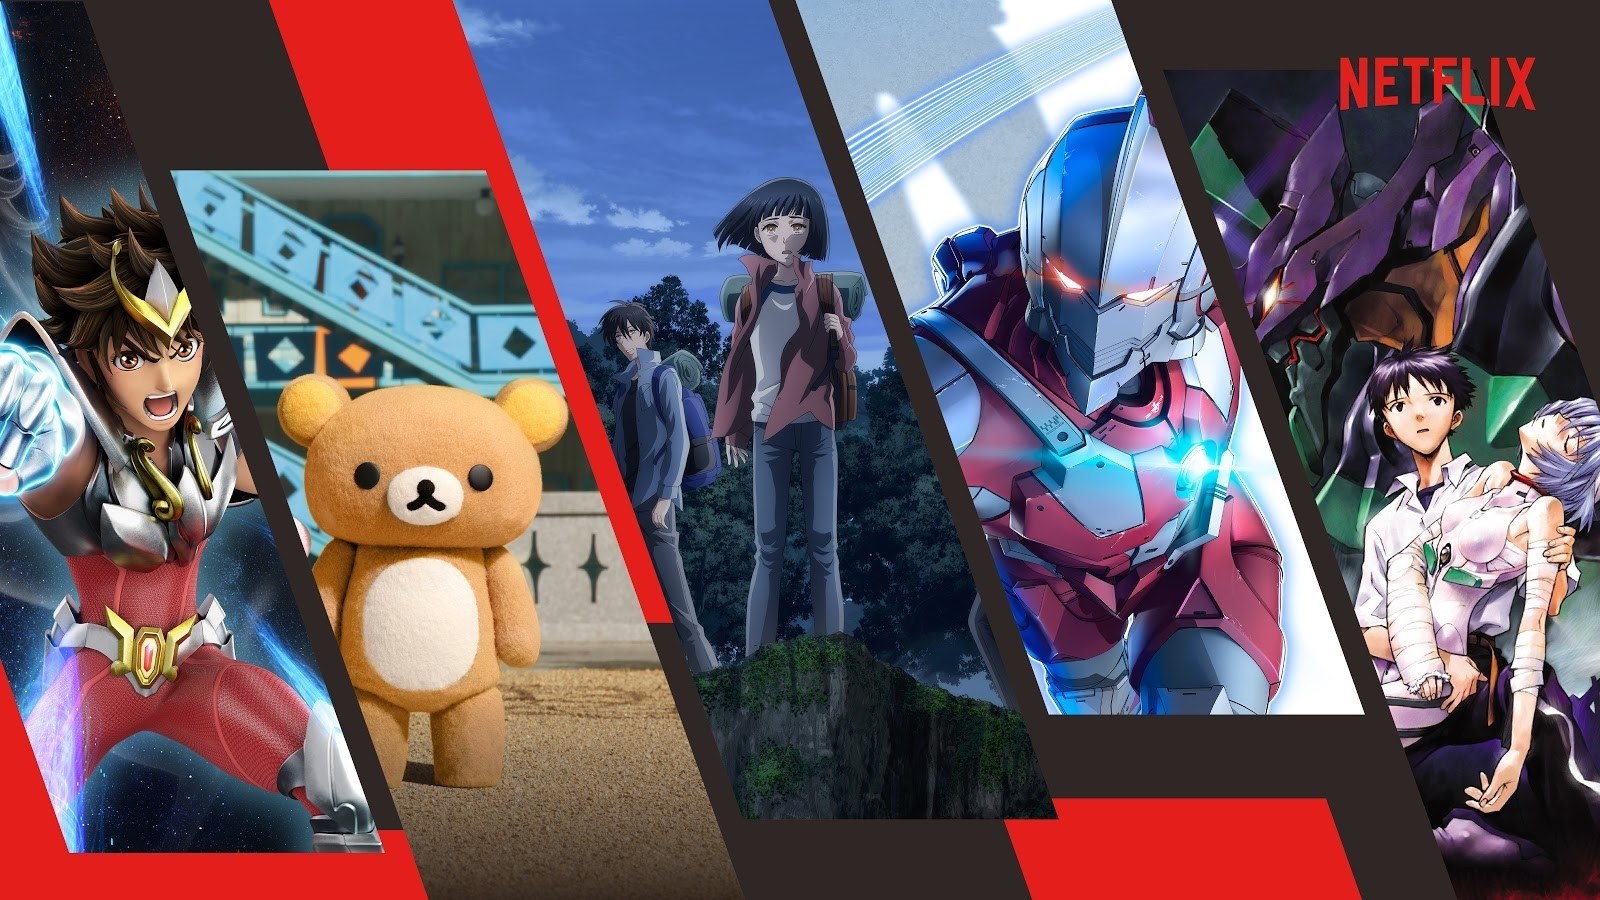 Top 50 Anime TV Shows & Movies on Netflix April 2019 - What's on Netflix